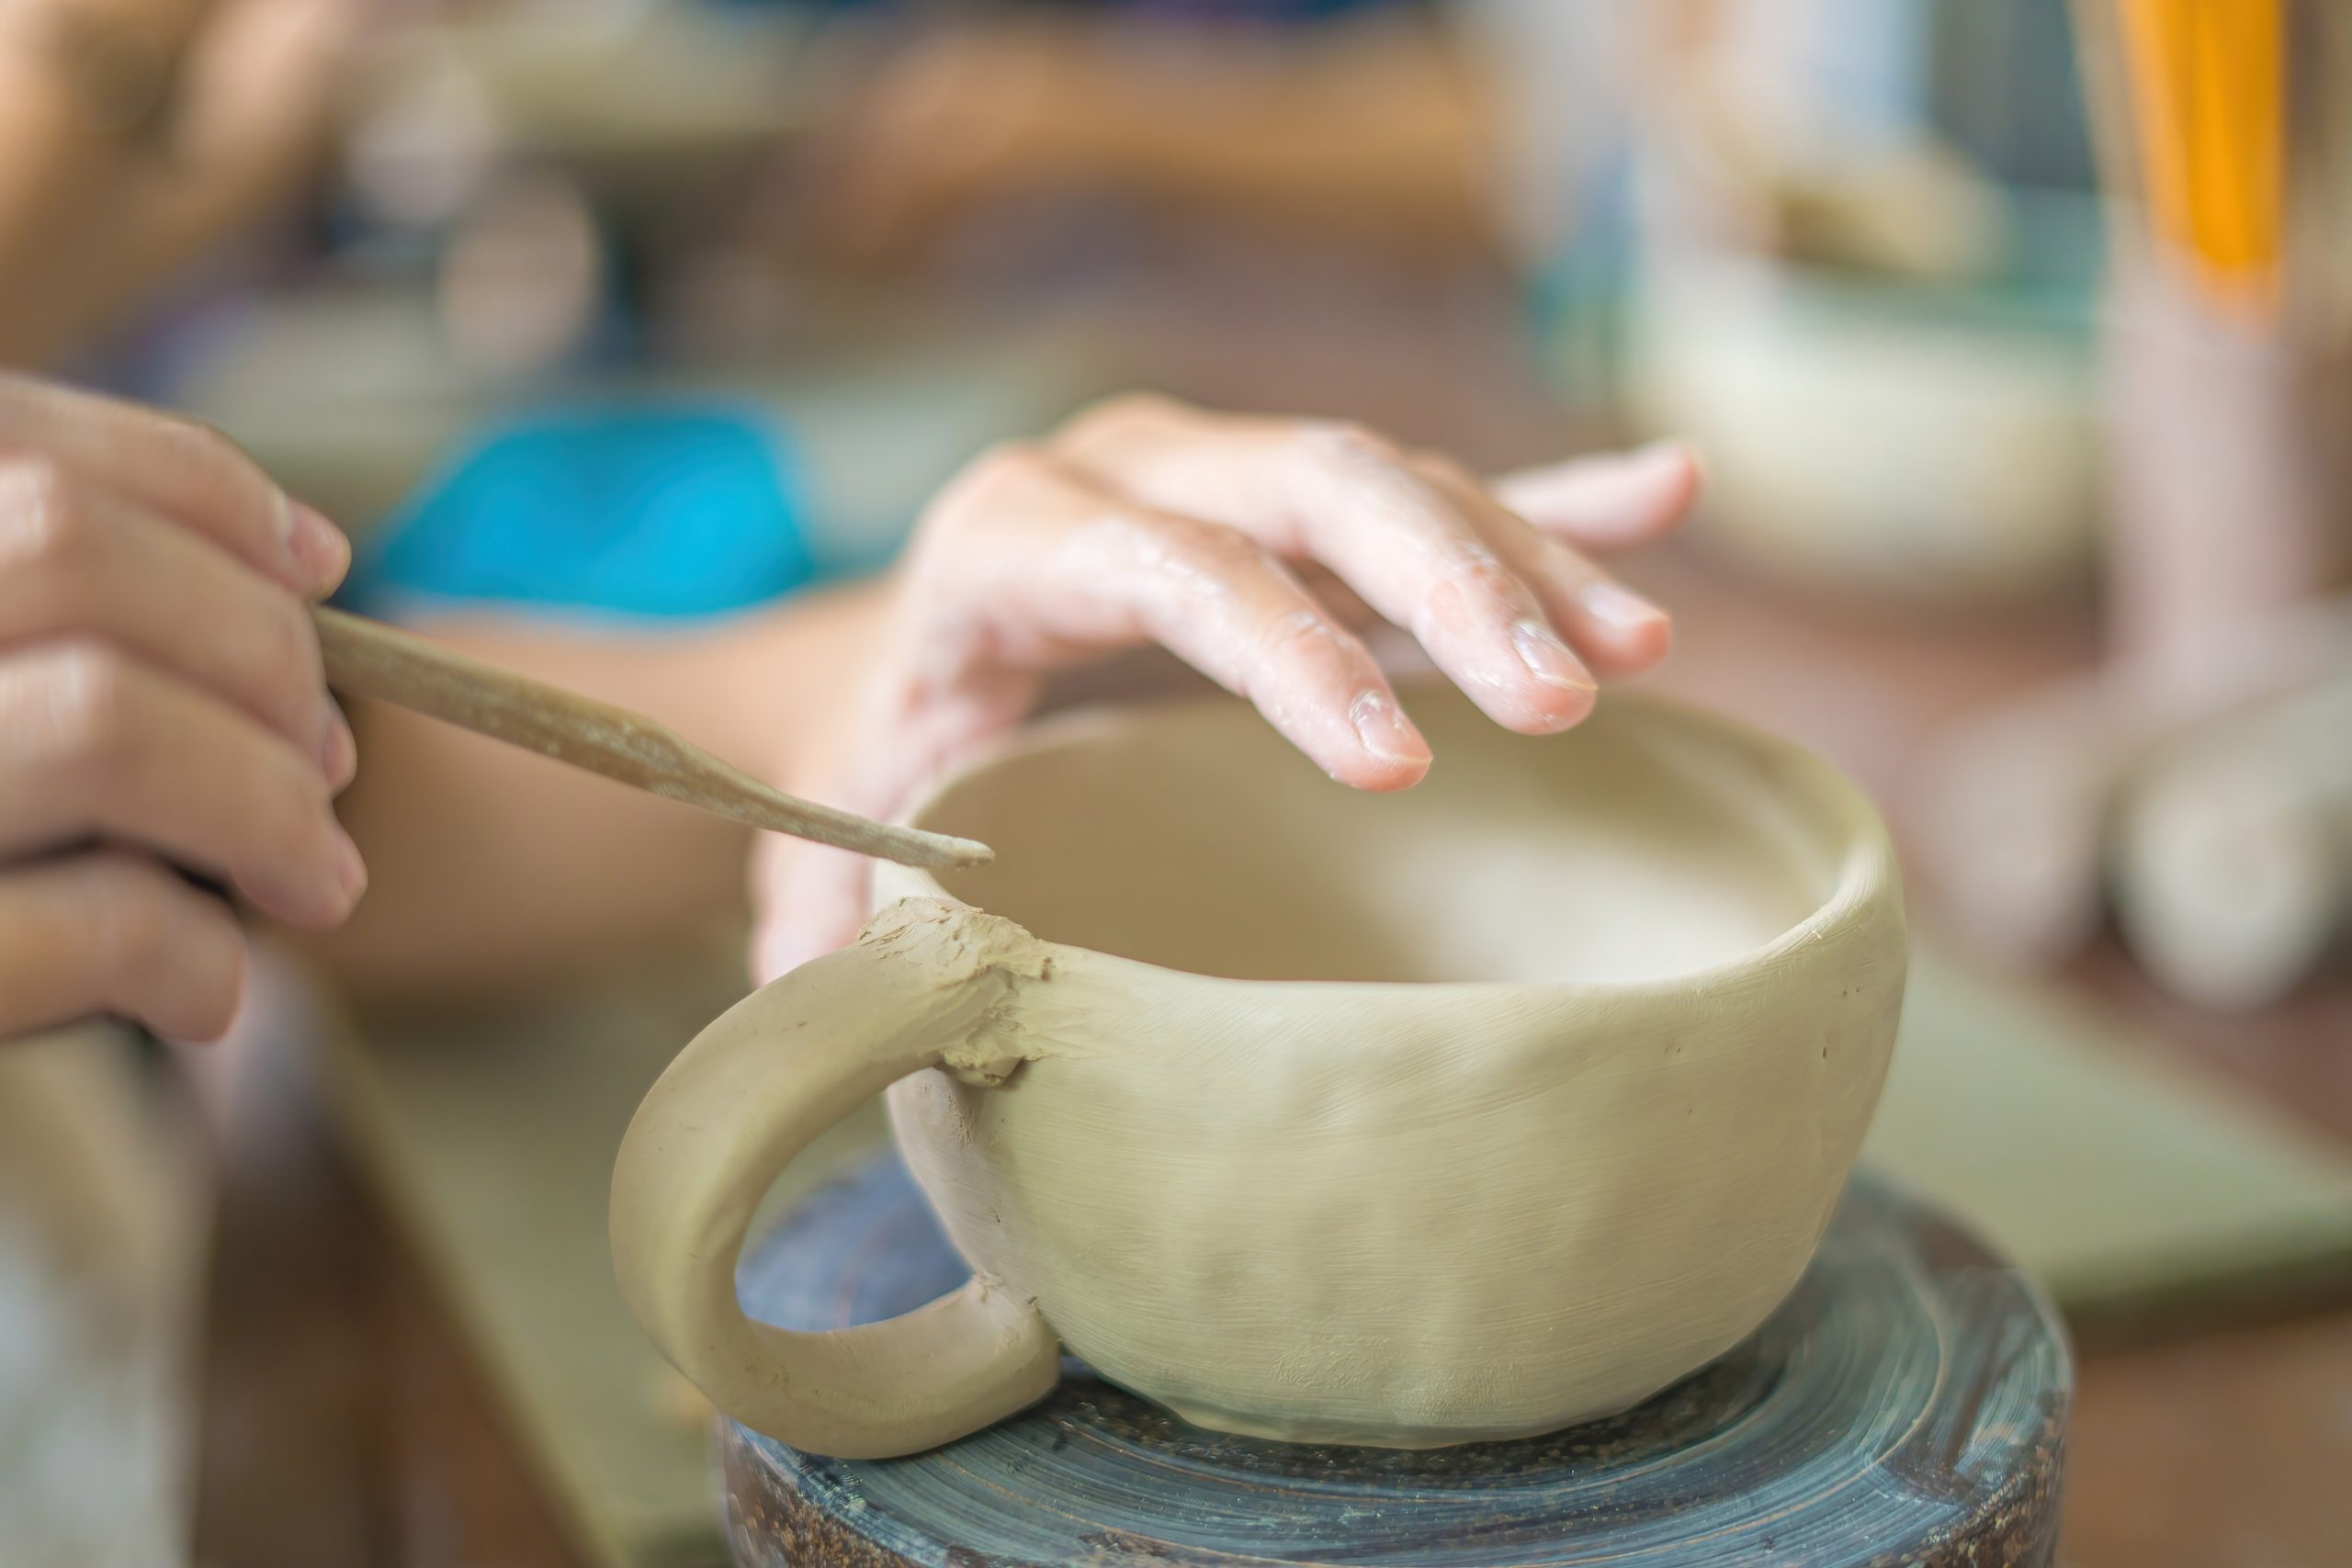 Woman,Potter,Working,On,Potters,Wheel,Making,Ceramic,Pot,From